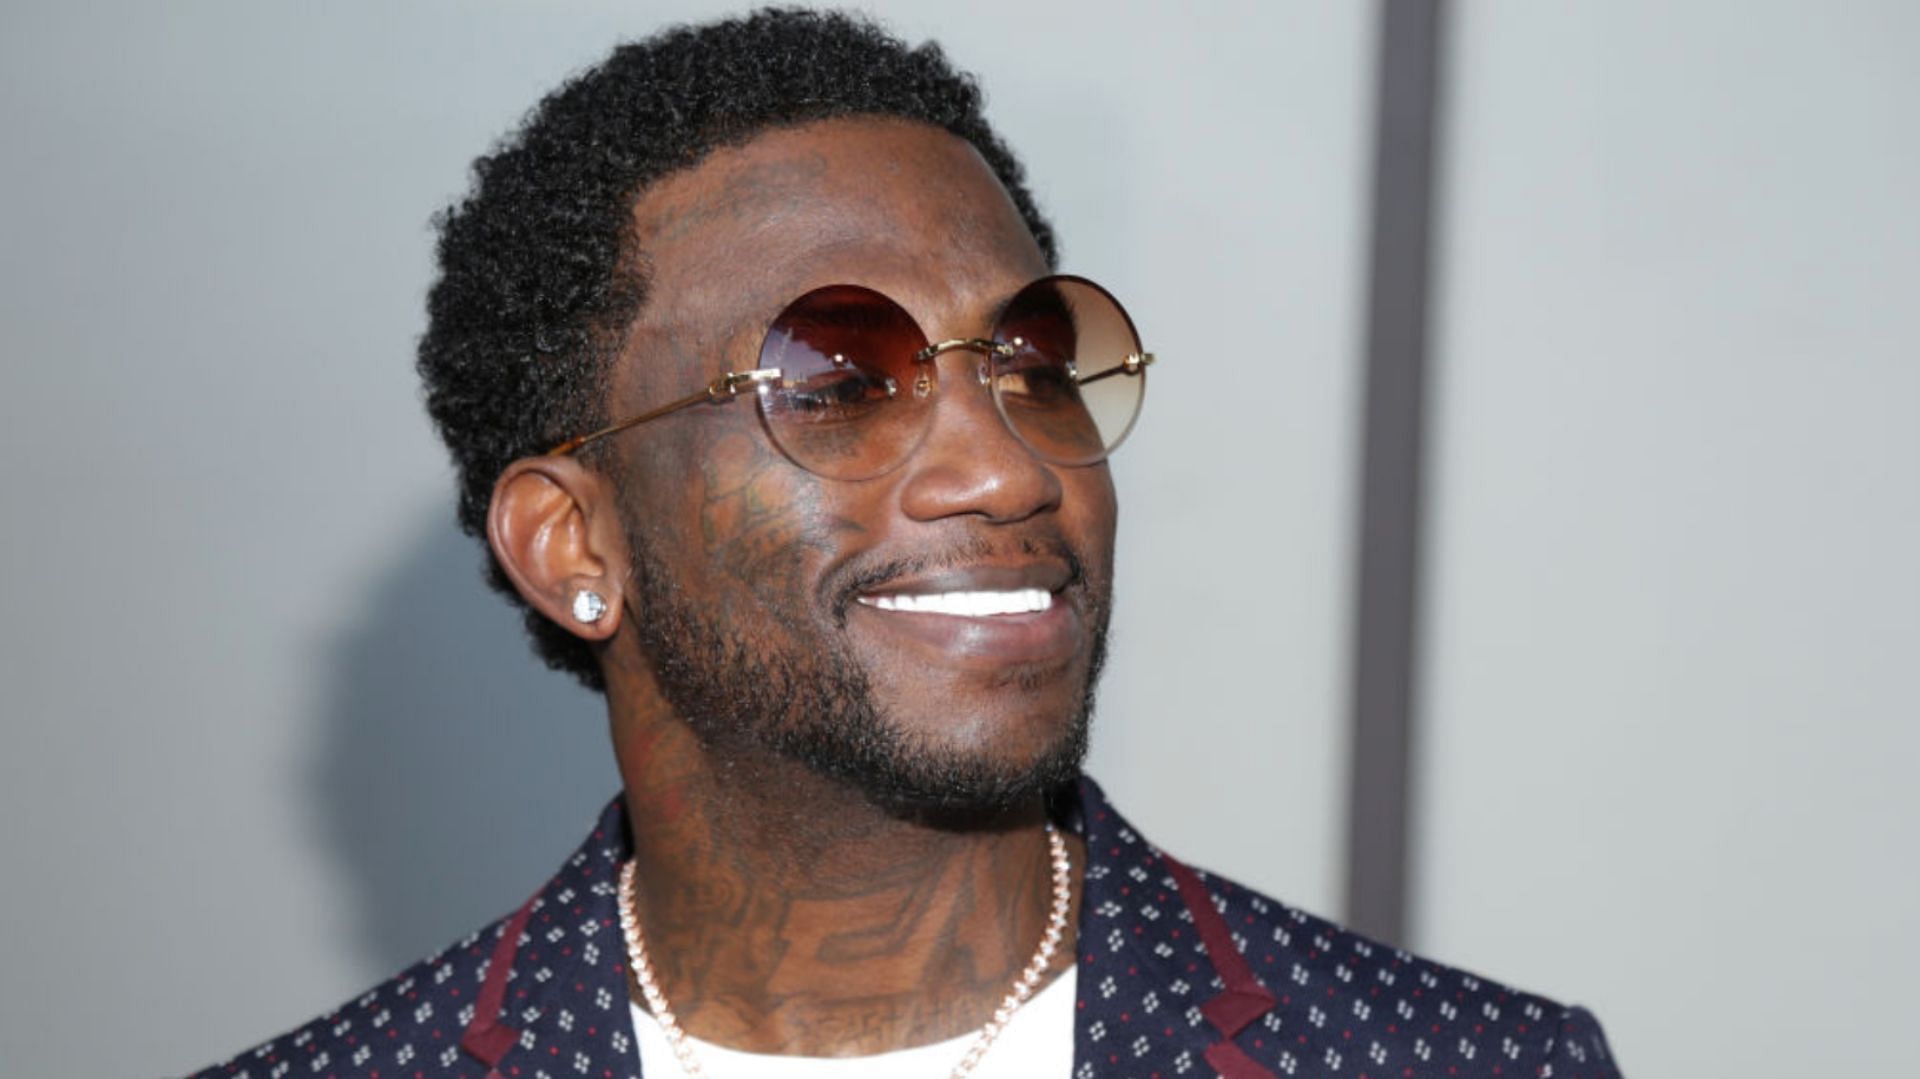 Gucci Mane has released an 80-track album. (Image via Getty)